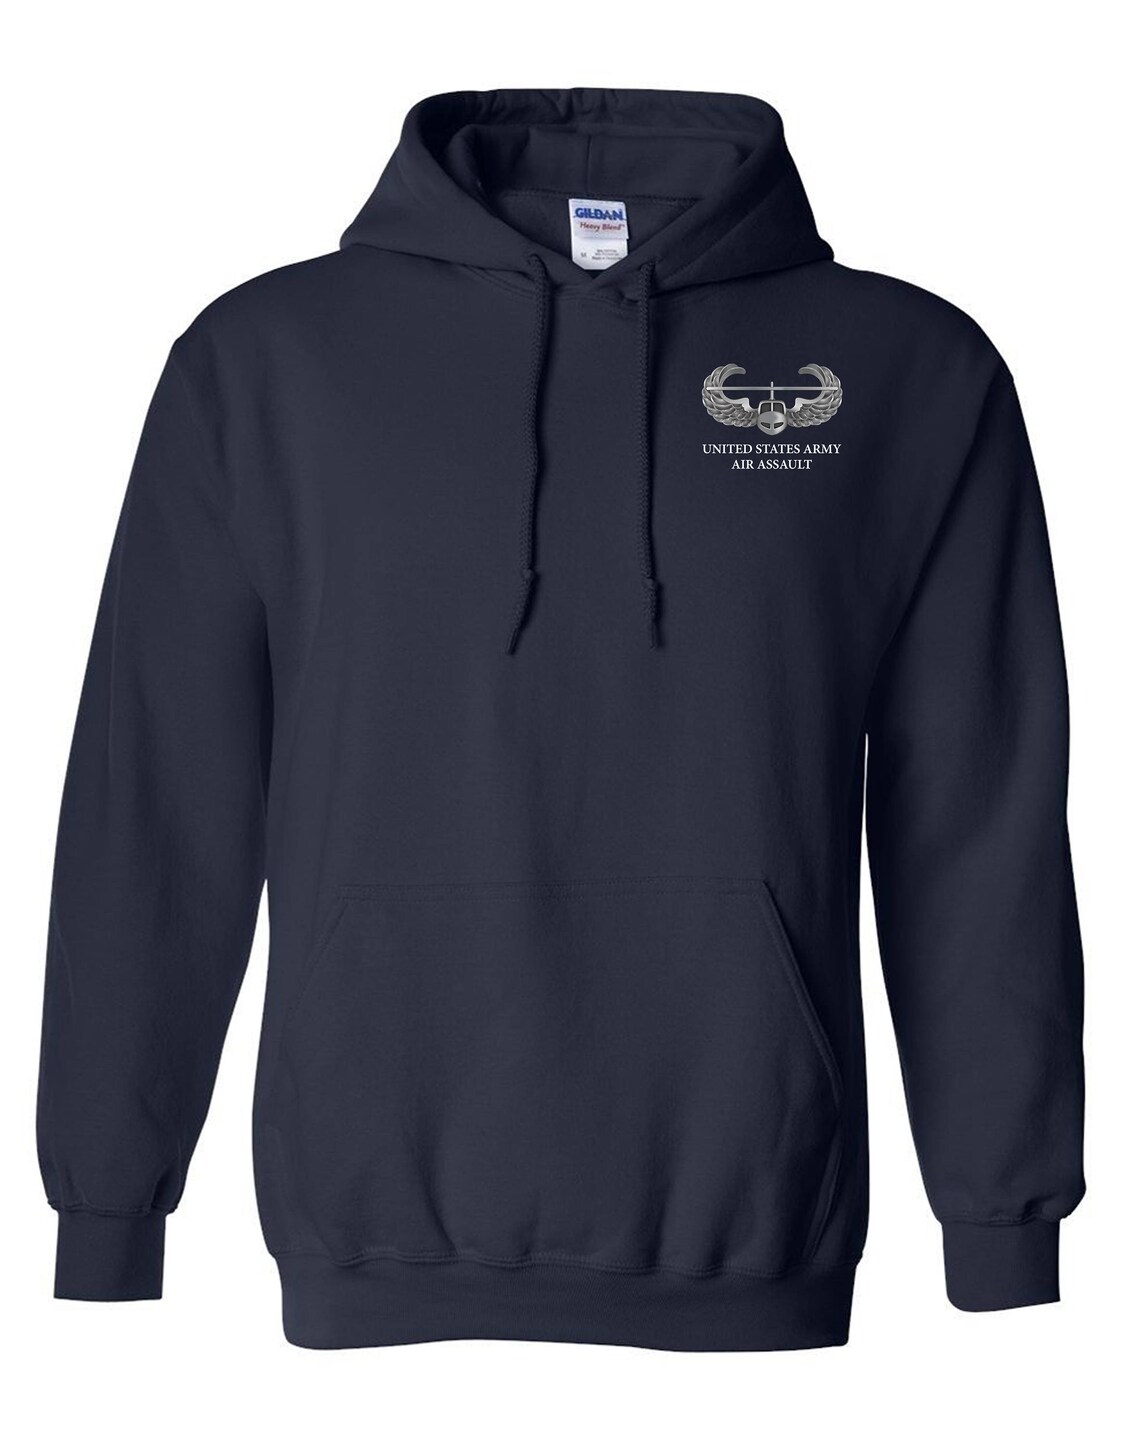 US Army Air Assault Embroidered Hooded Sweatshirt-7254 - Etsy